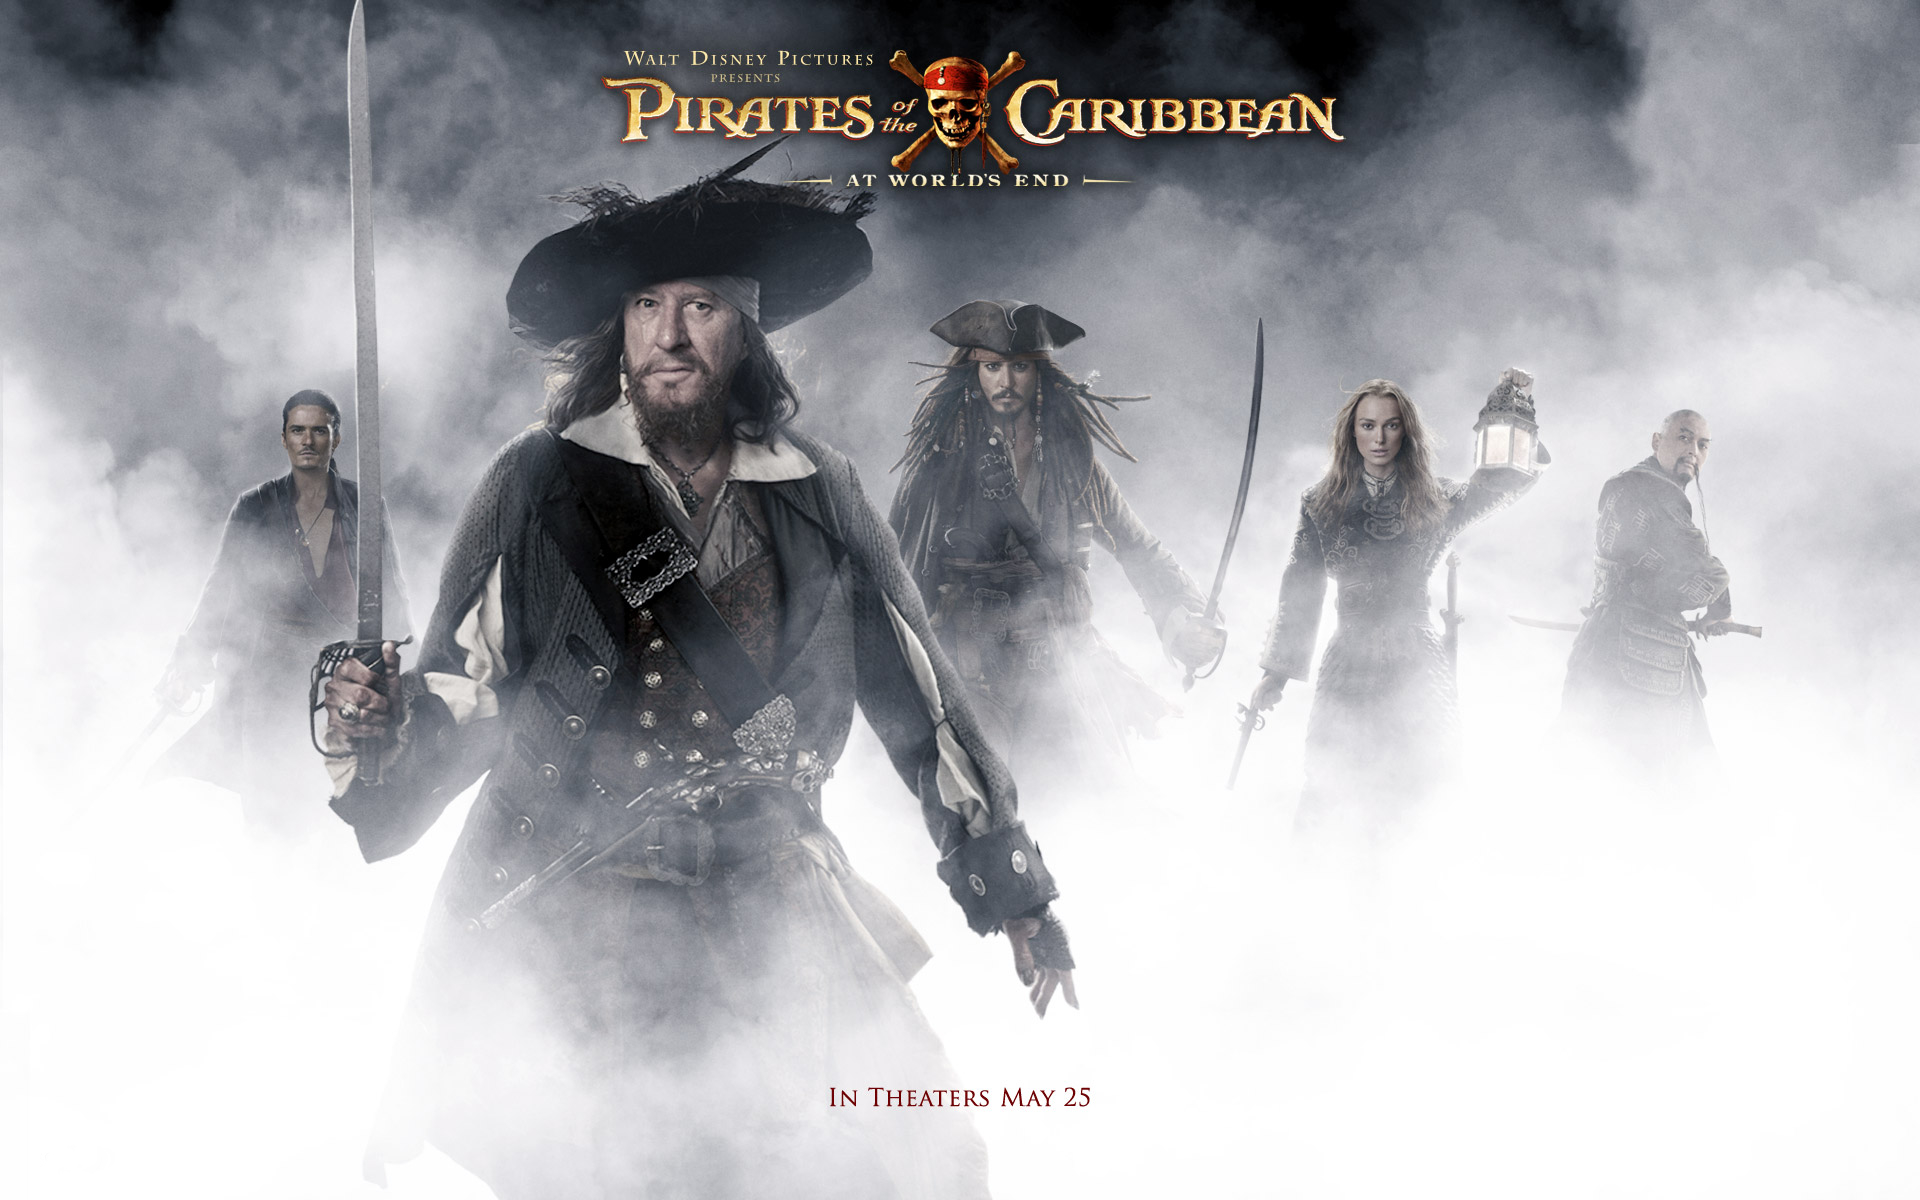 keira knightley, movie, pirates of the caribbean: at world's end, captain sao feng, chow yun fat, elizabeth swann, geoffrey rush, hector barbossa, jack sparrow, johnny depp, orlando bloom, will turner, pirates of the caribbean